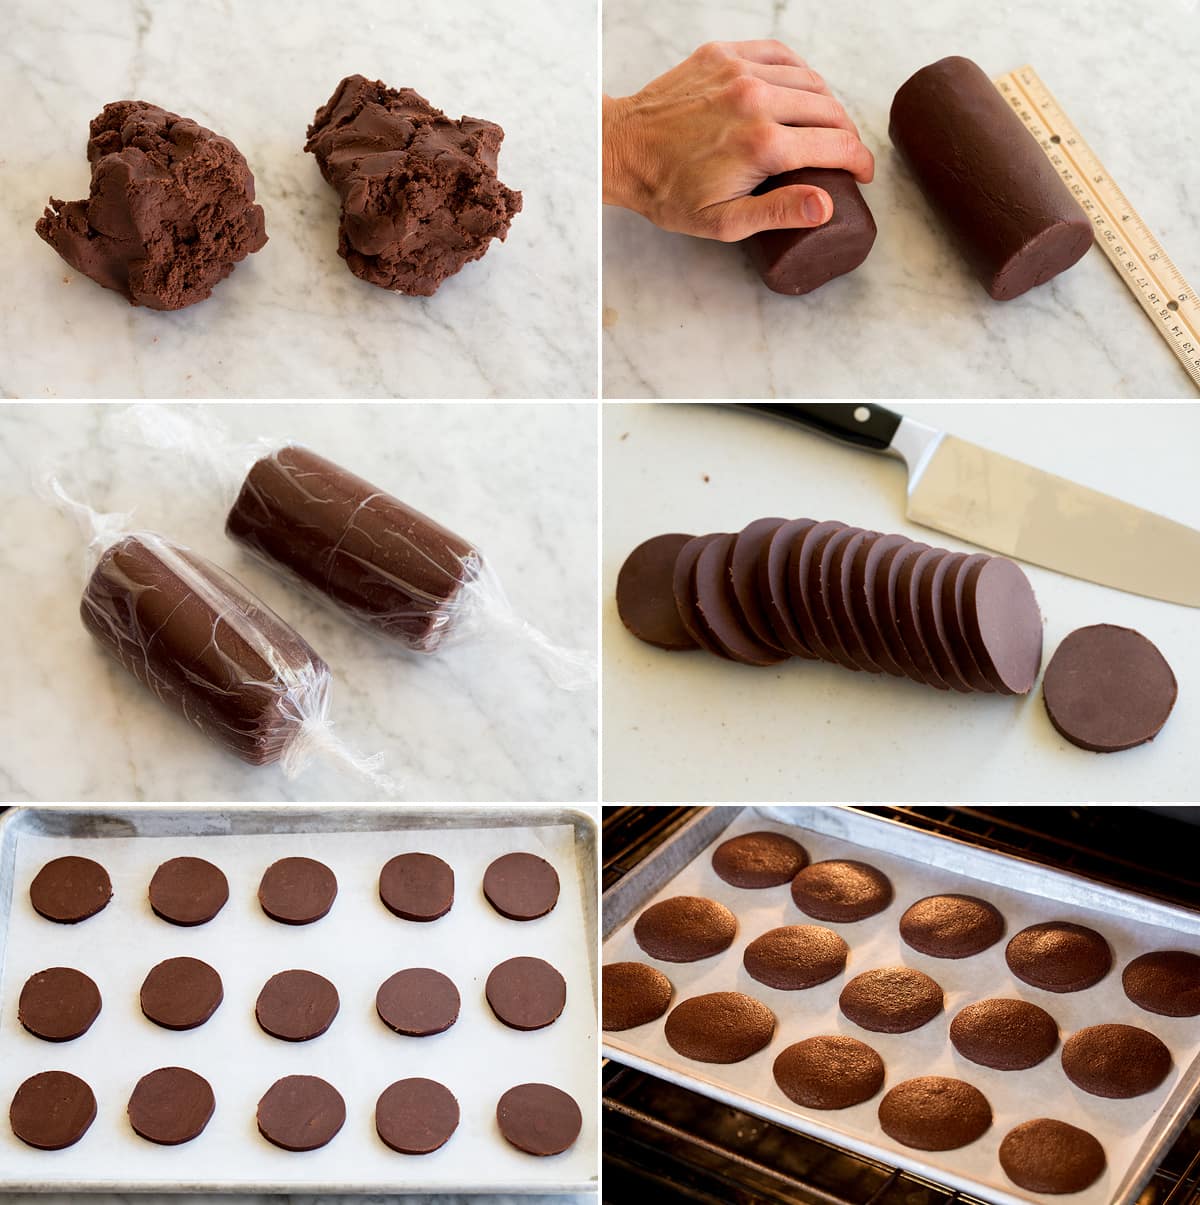 Collage of photos showing how to roll, slice and bake chocolate cookies.